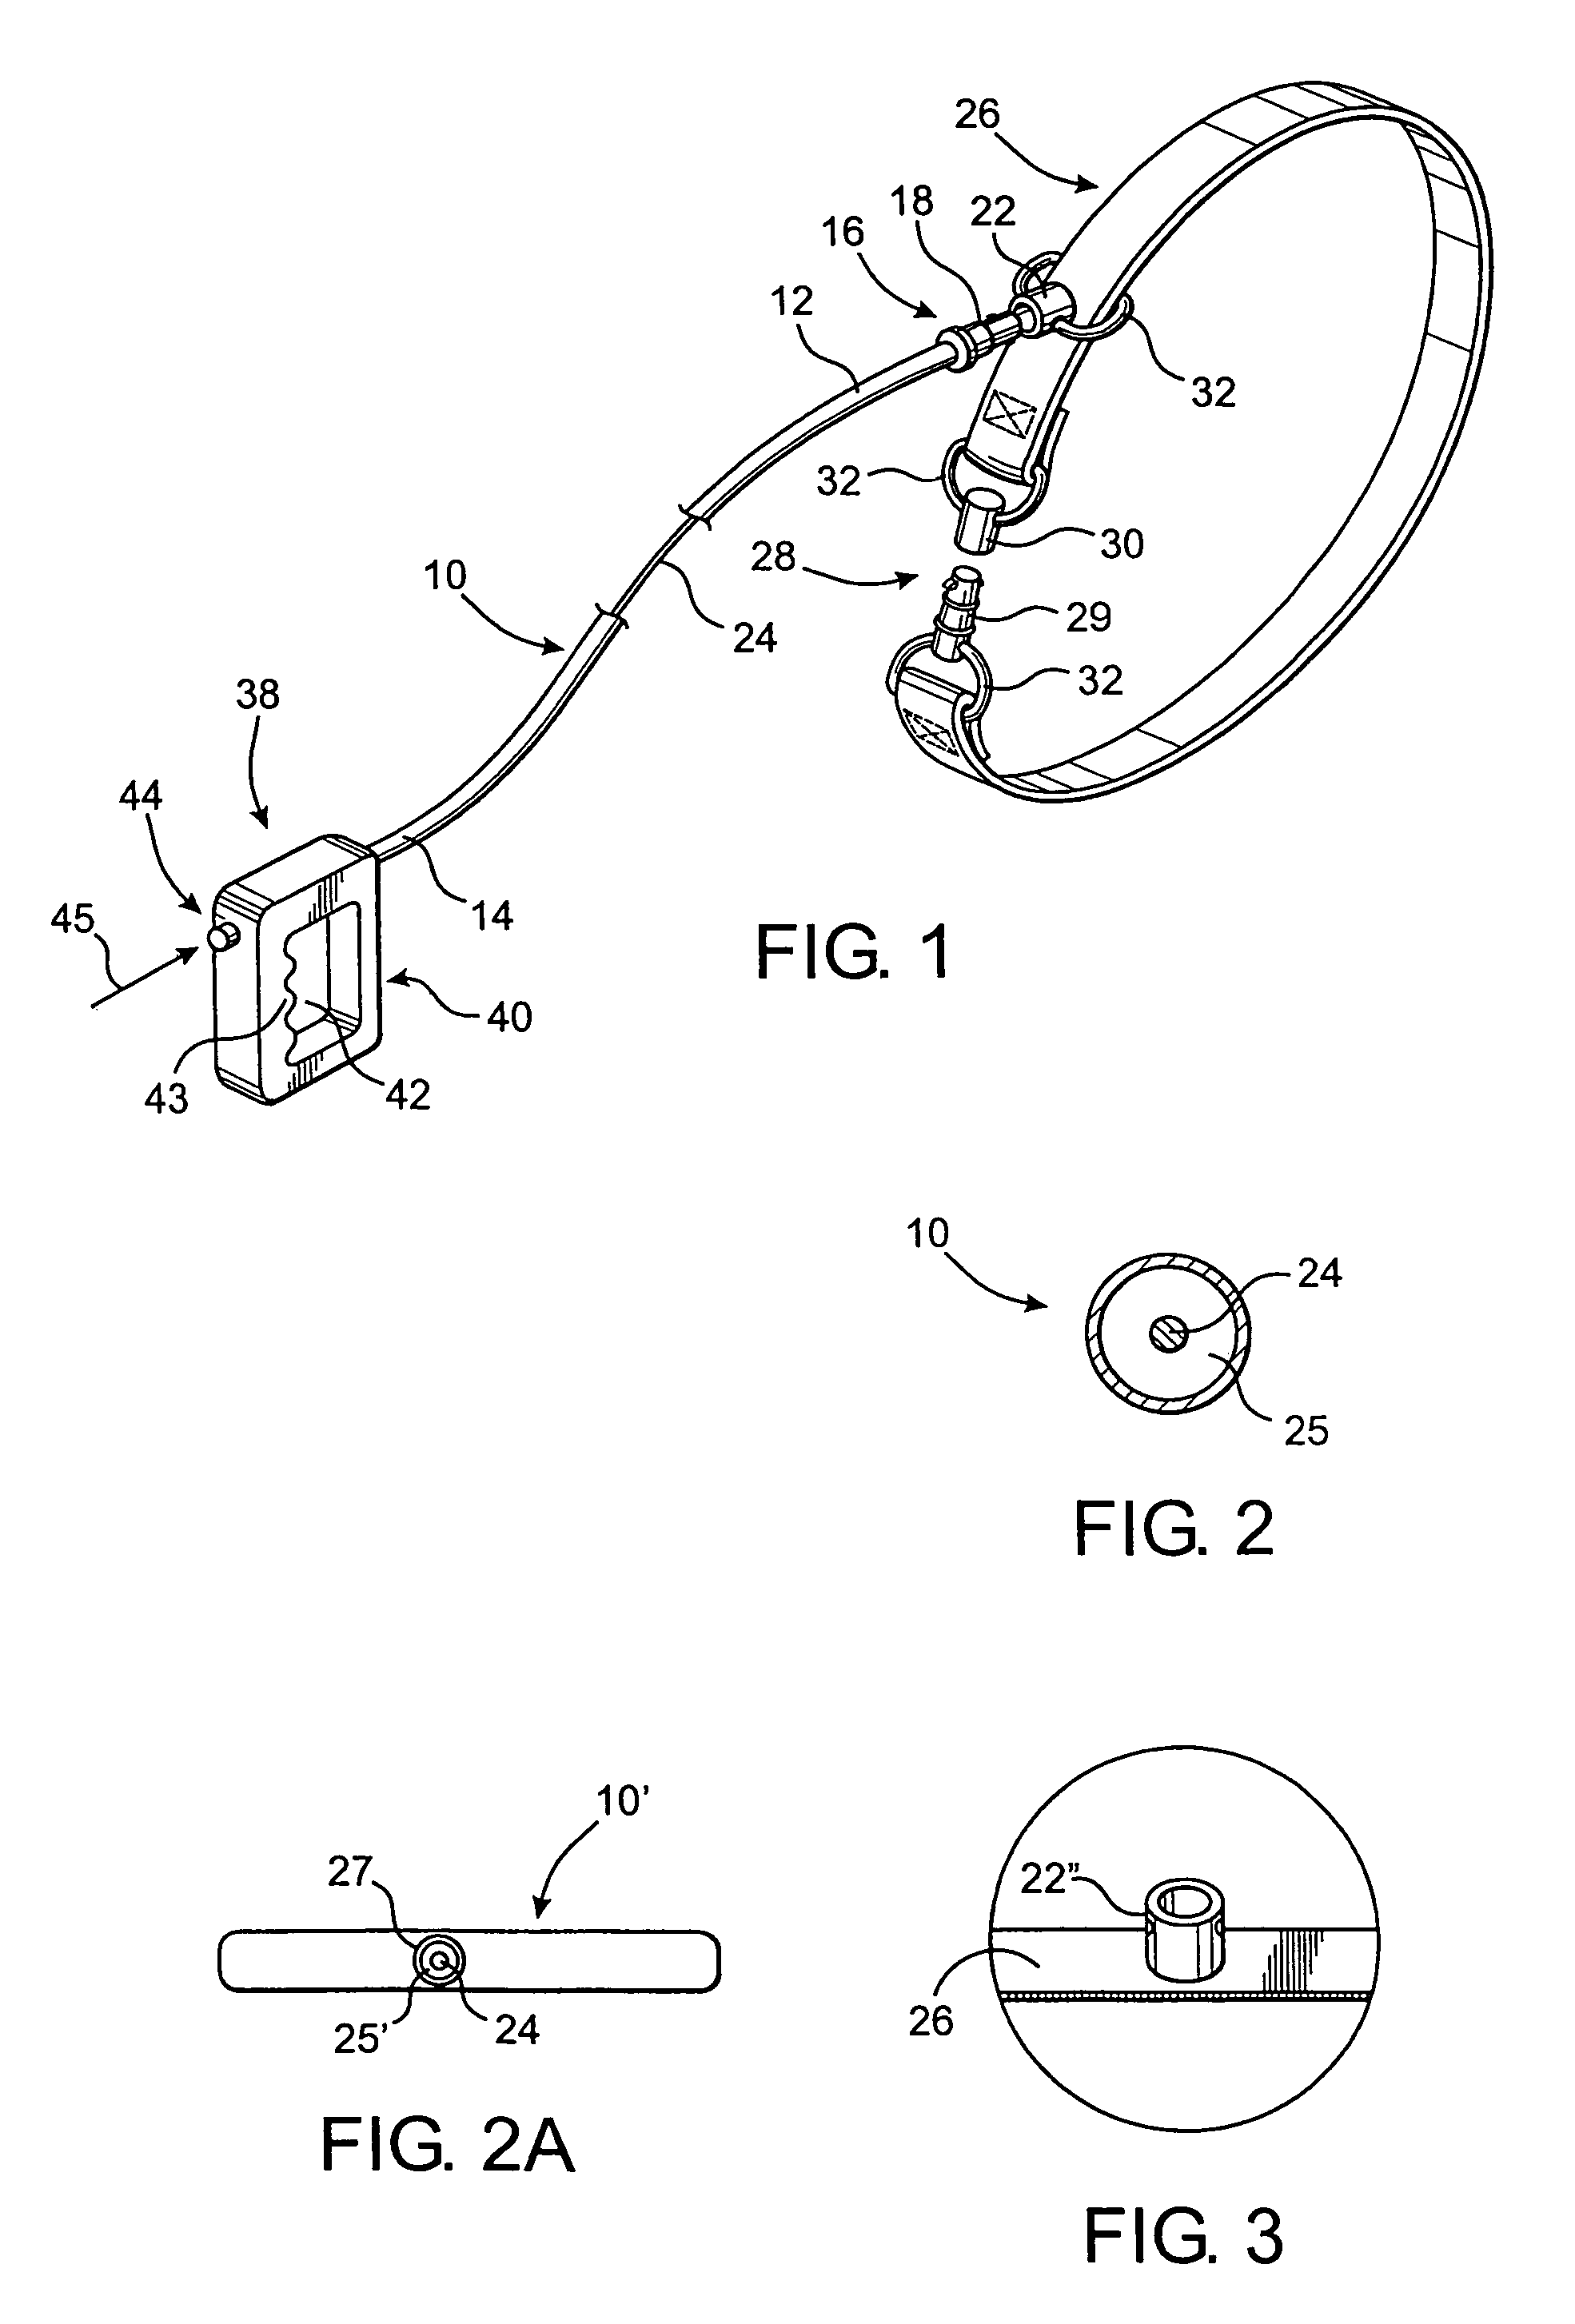 Retractable leash assembly with a quick connect coupling assembly